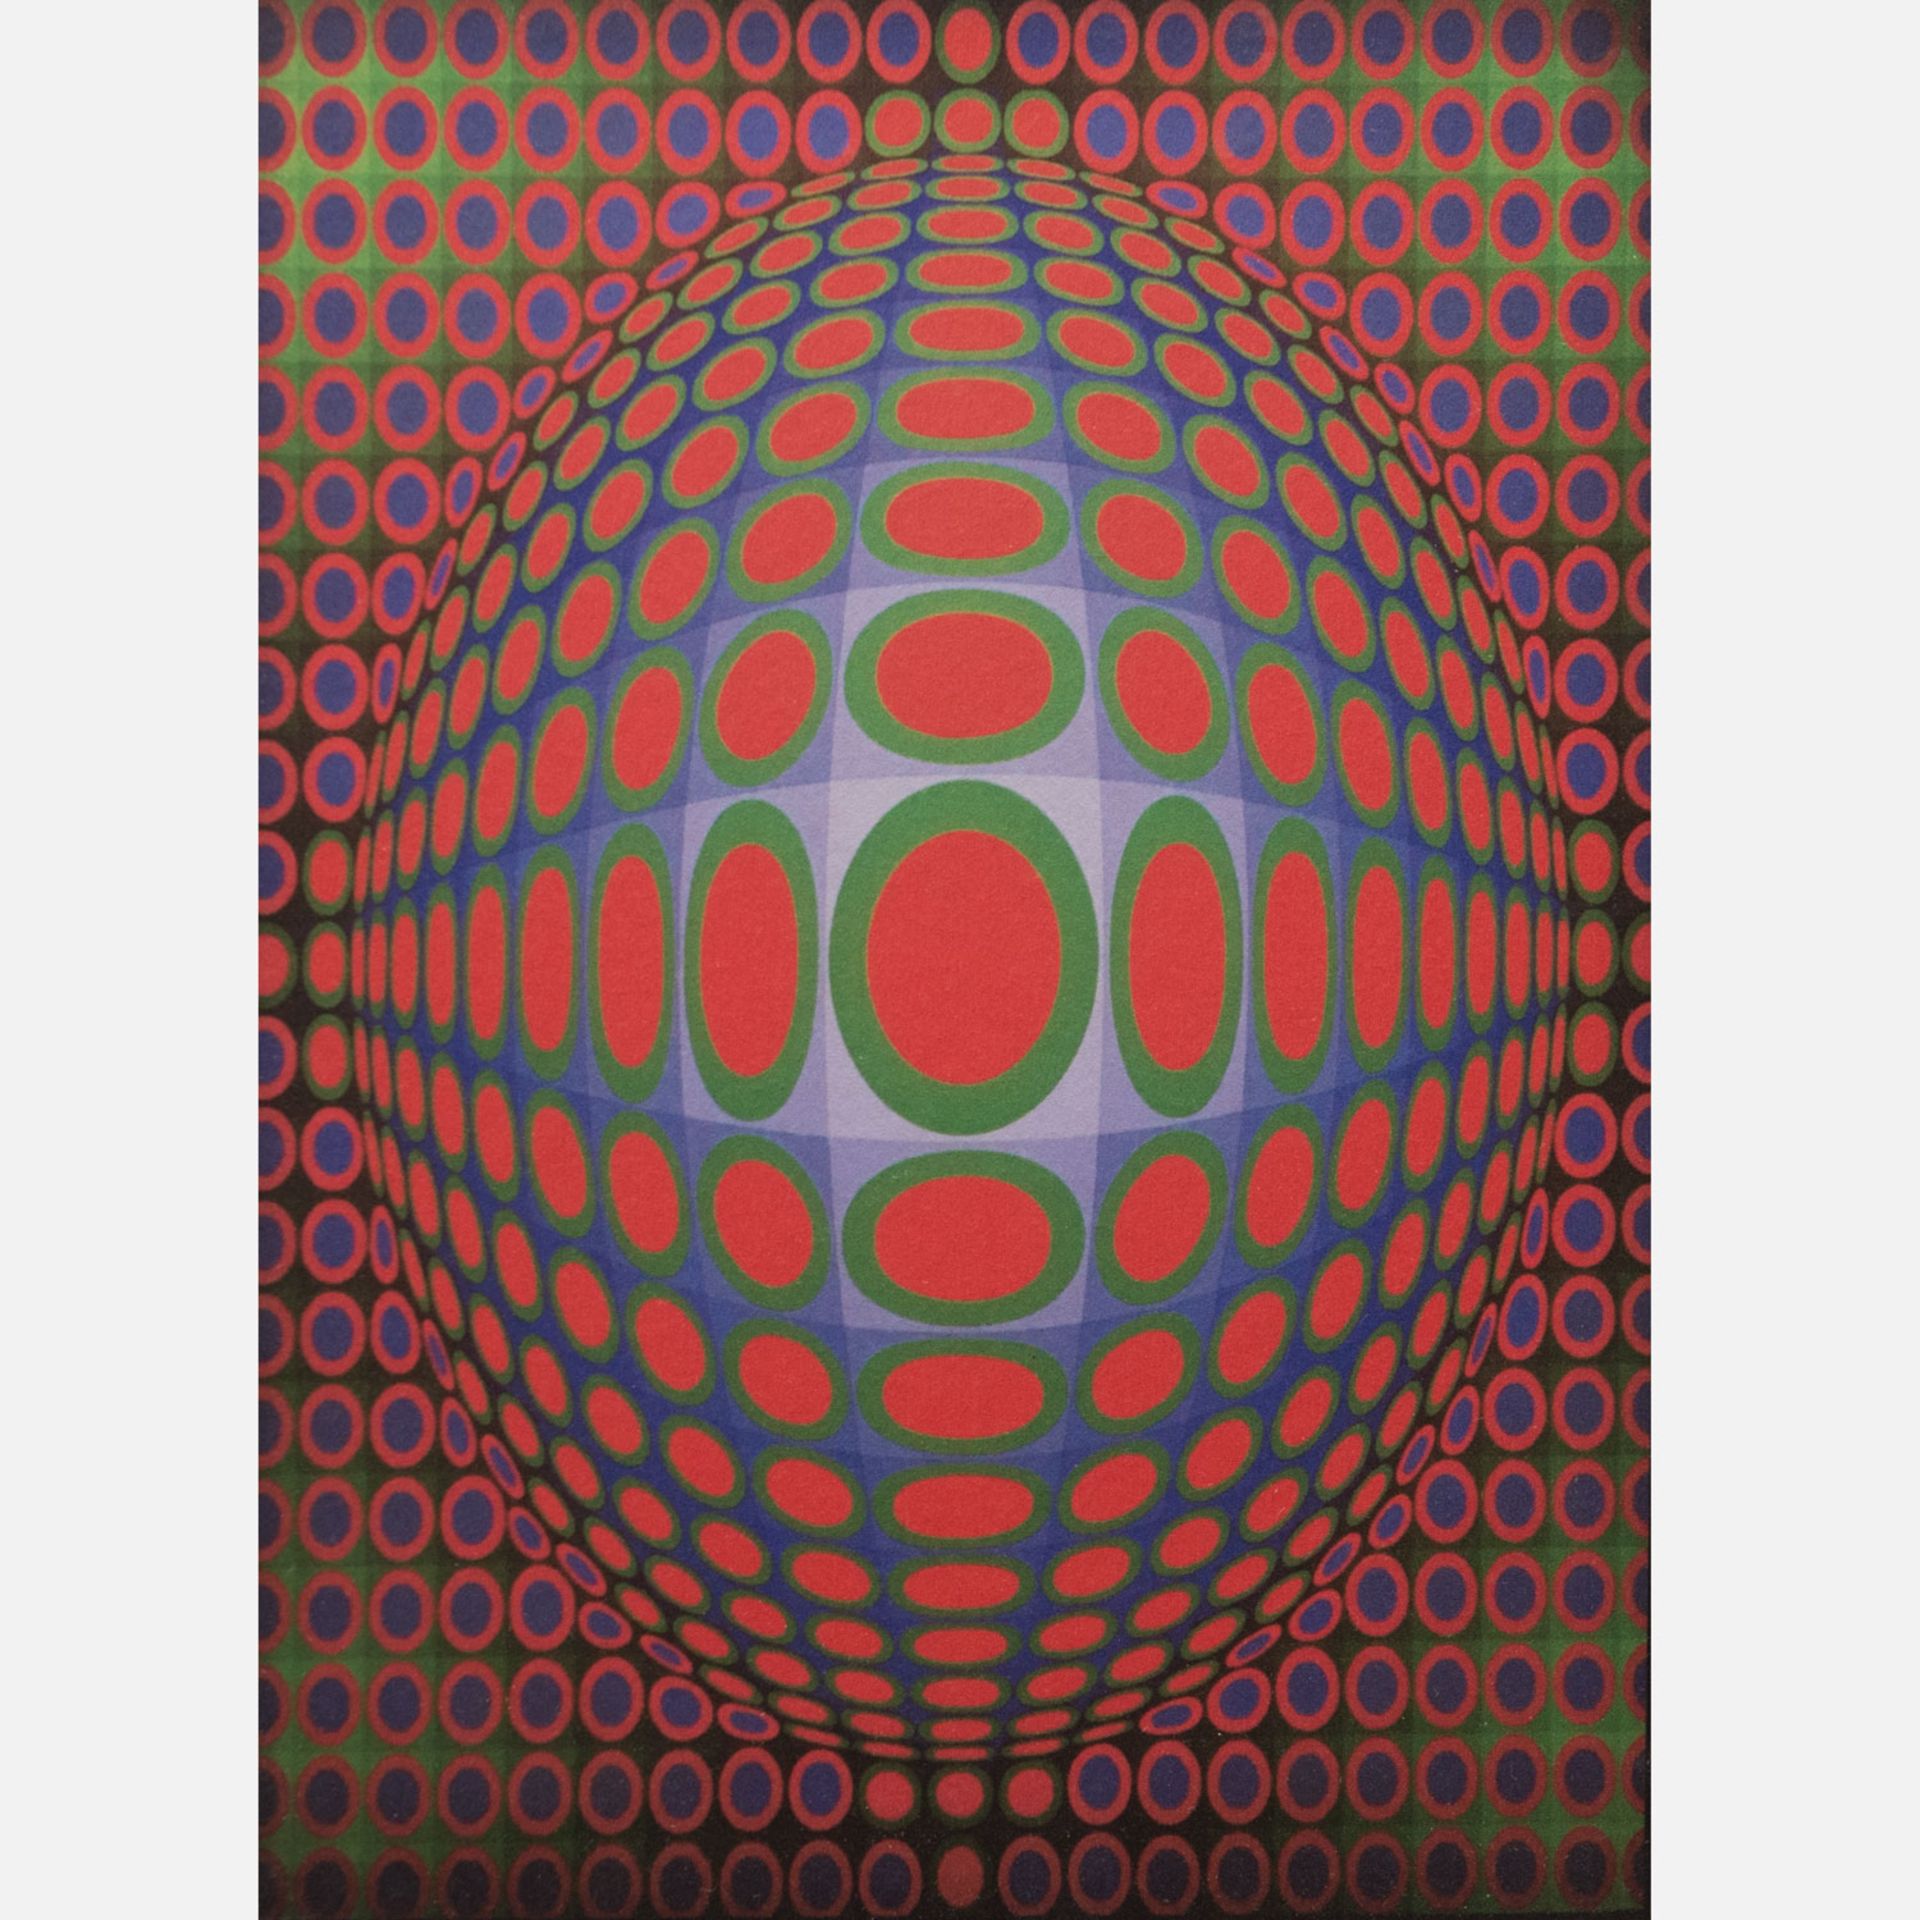 Victor Vasarely (1906-1997)-graphic - Image 2 of 3